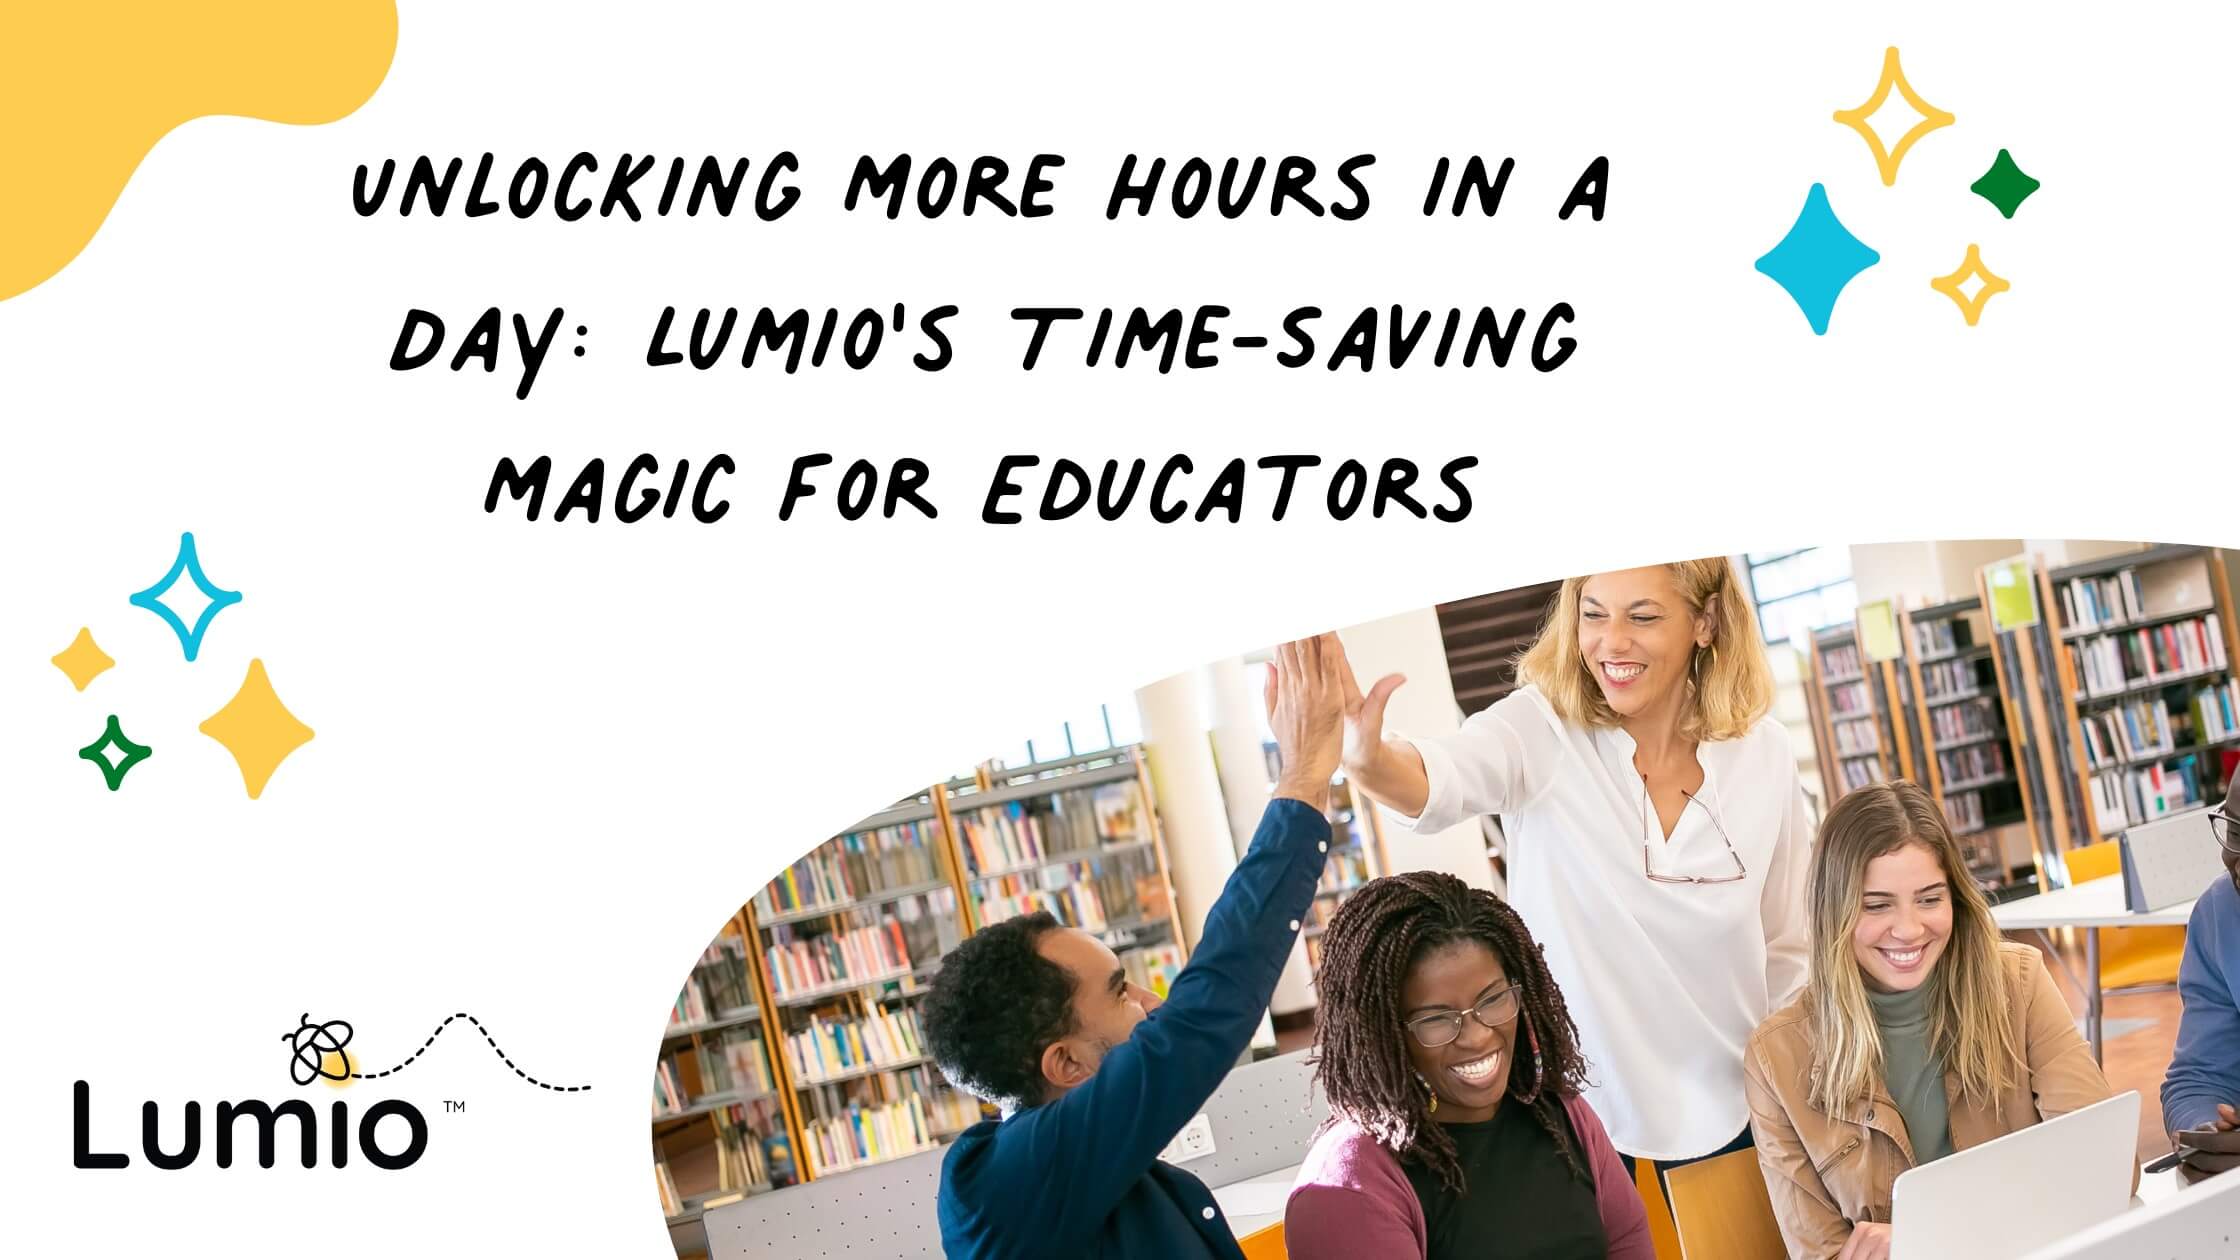 Teachers in a school library collaborating around EdTech tools like Lumio.